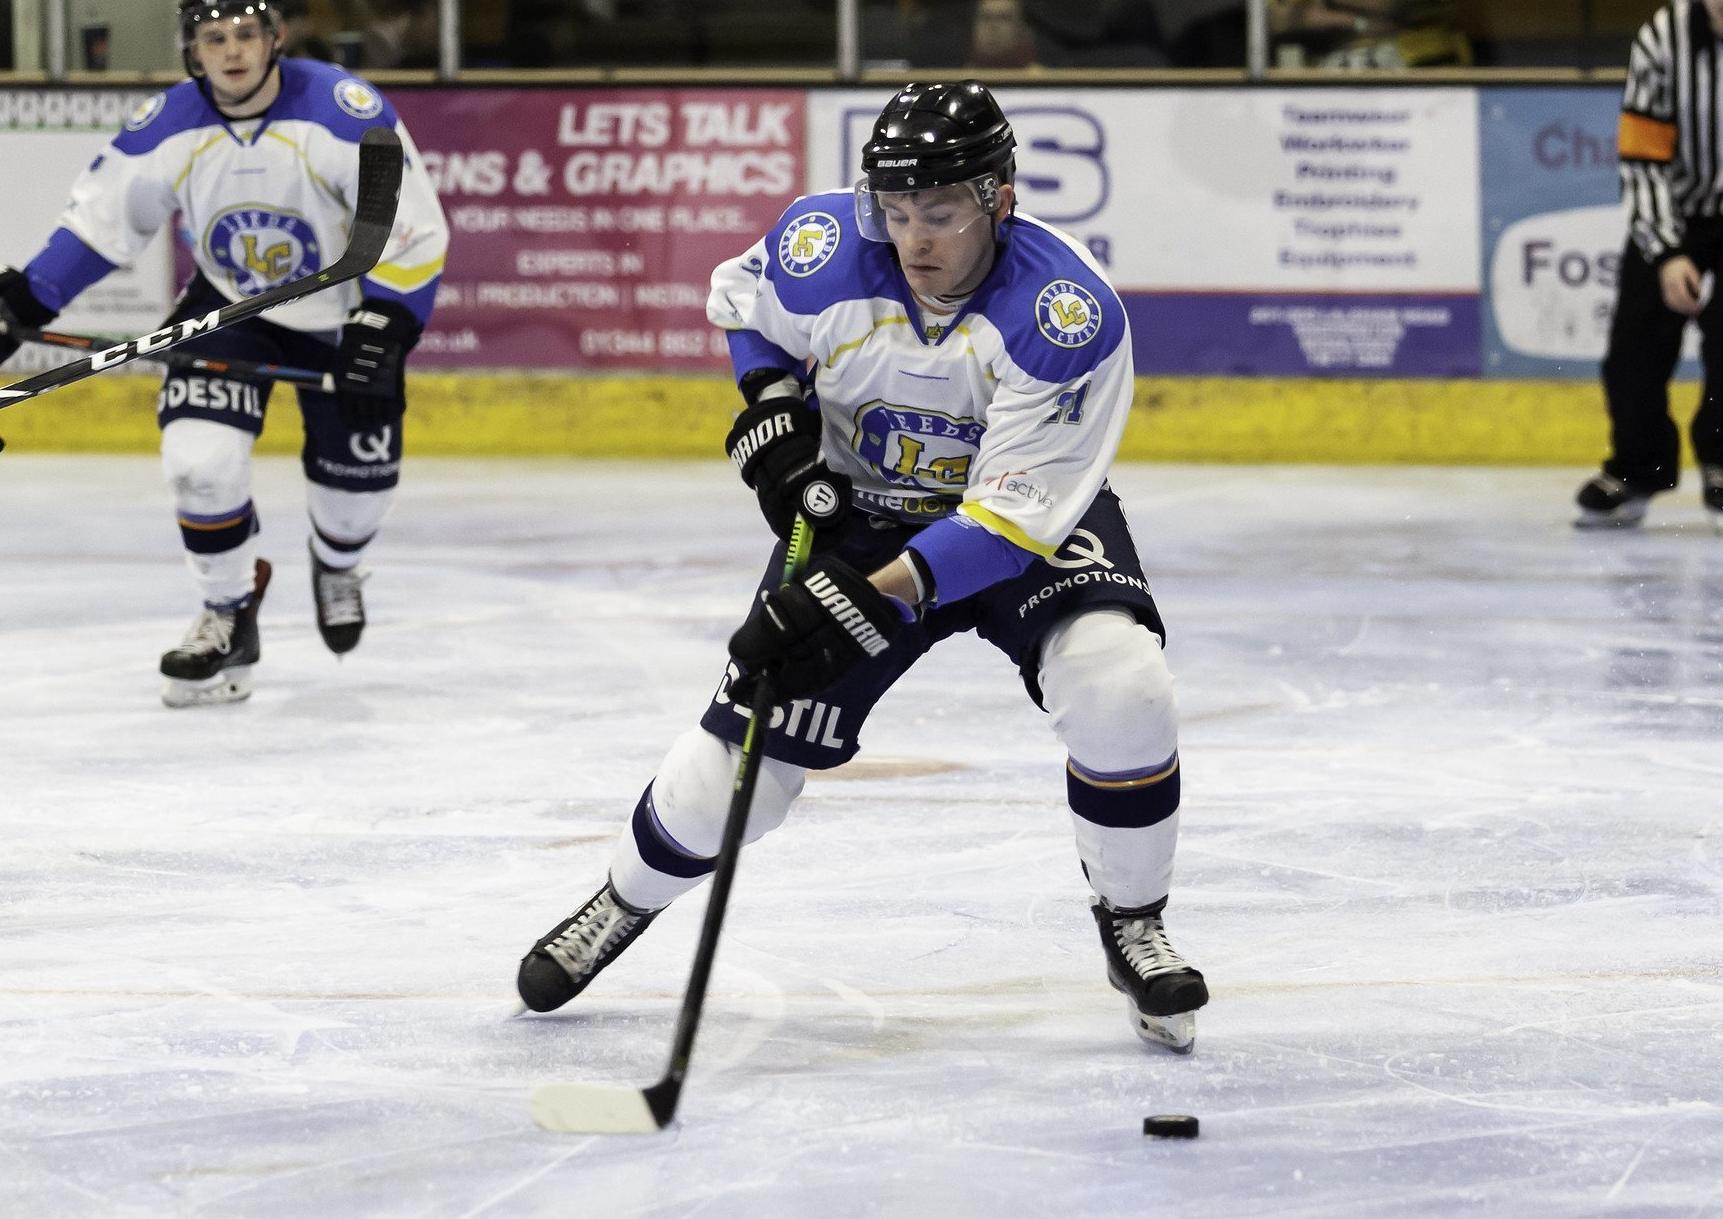 ON TARGET: Liam Charnock made it 4-0 against Milton Keynes in Coventry. 
Picture courtesy of Kevin Slyfield